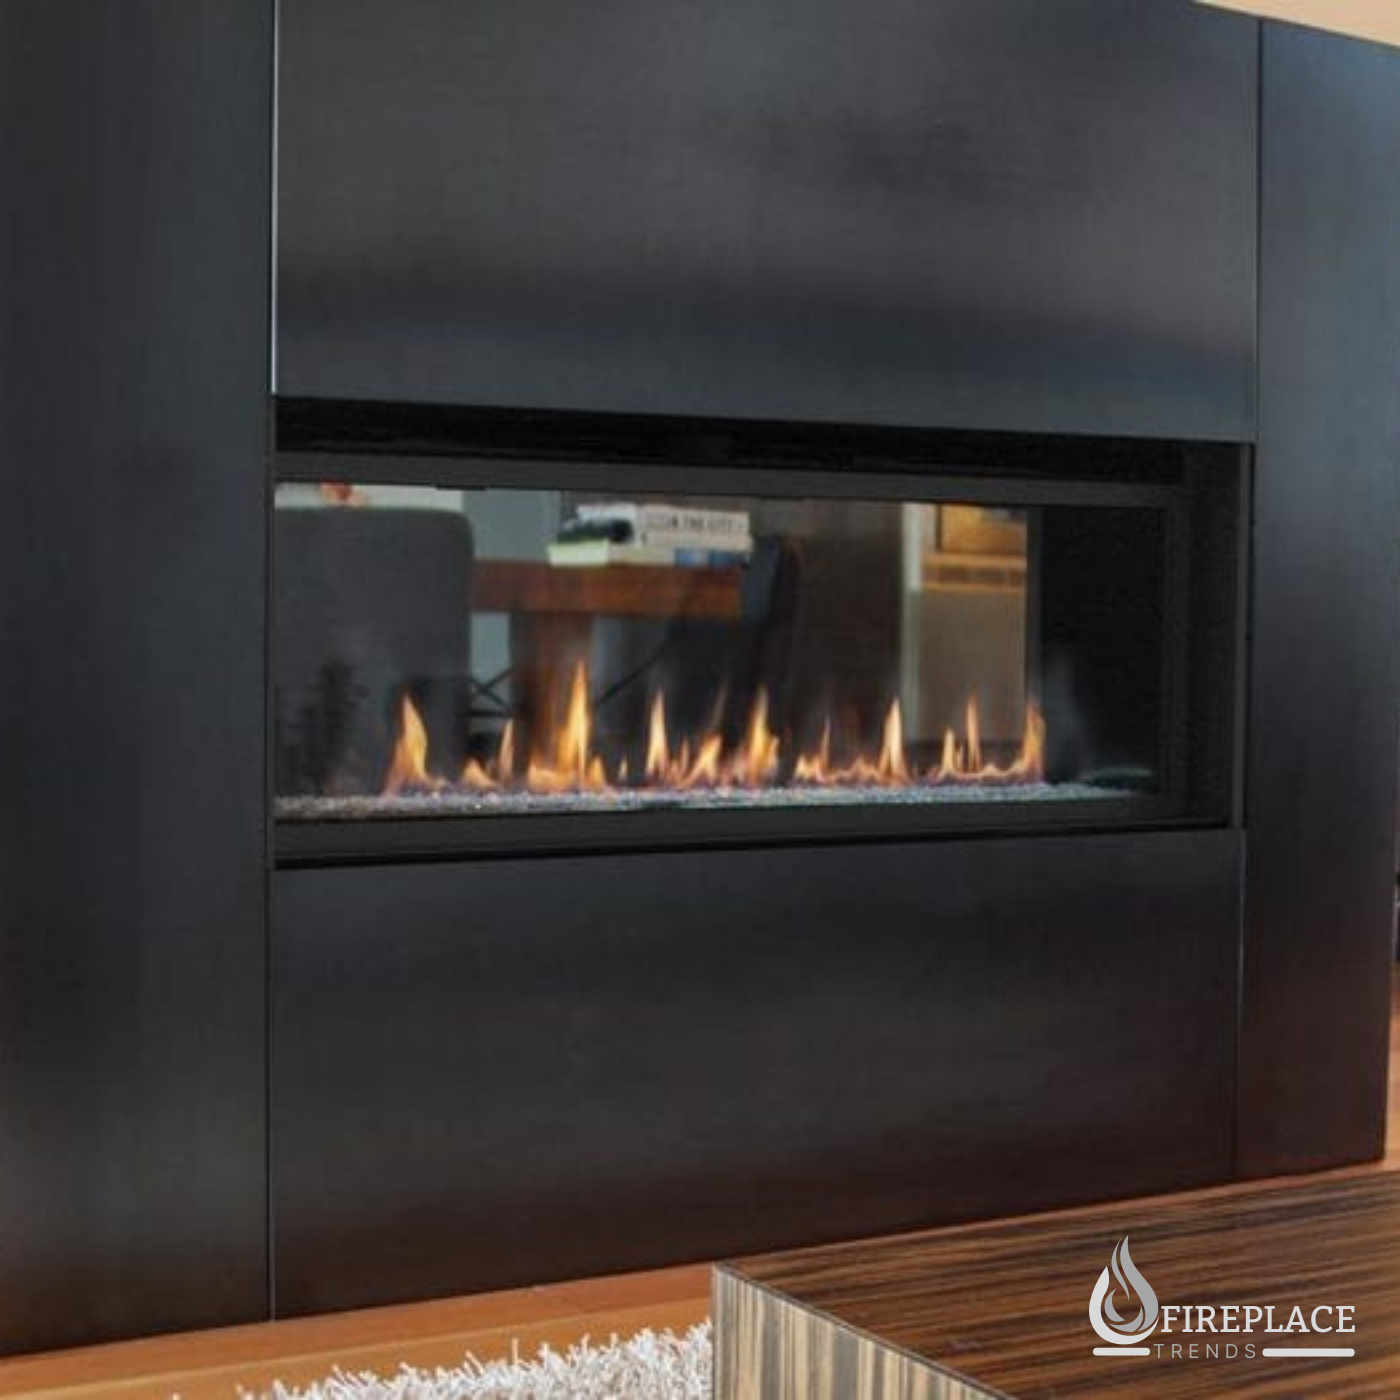 Superior - 72" - Electronic Ignition, Lights Direct Vent Linear Gas Fireplace - DRL 6000 Series